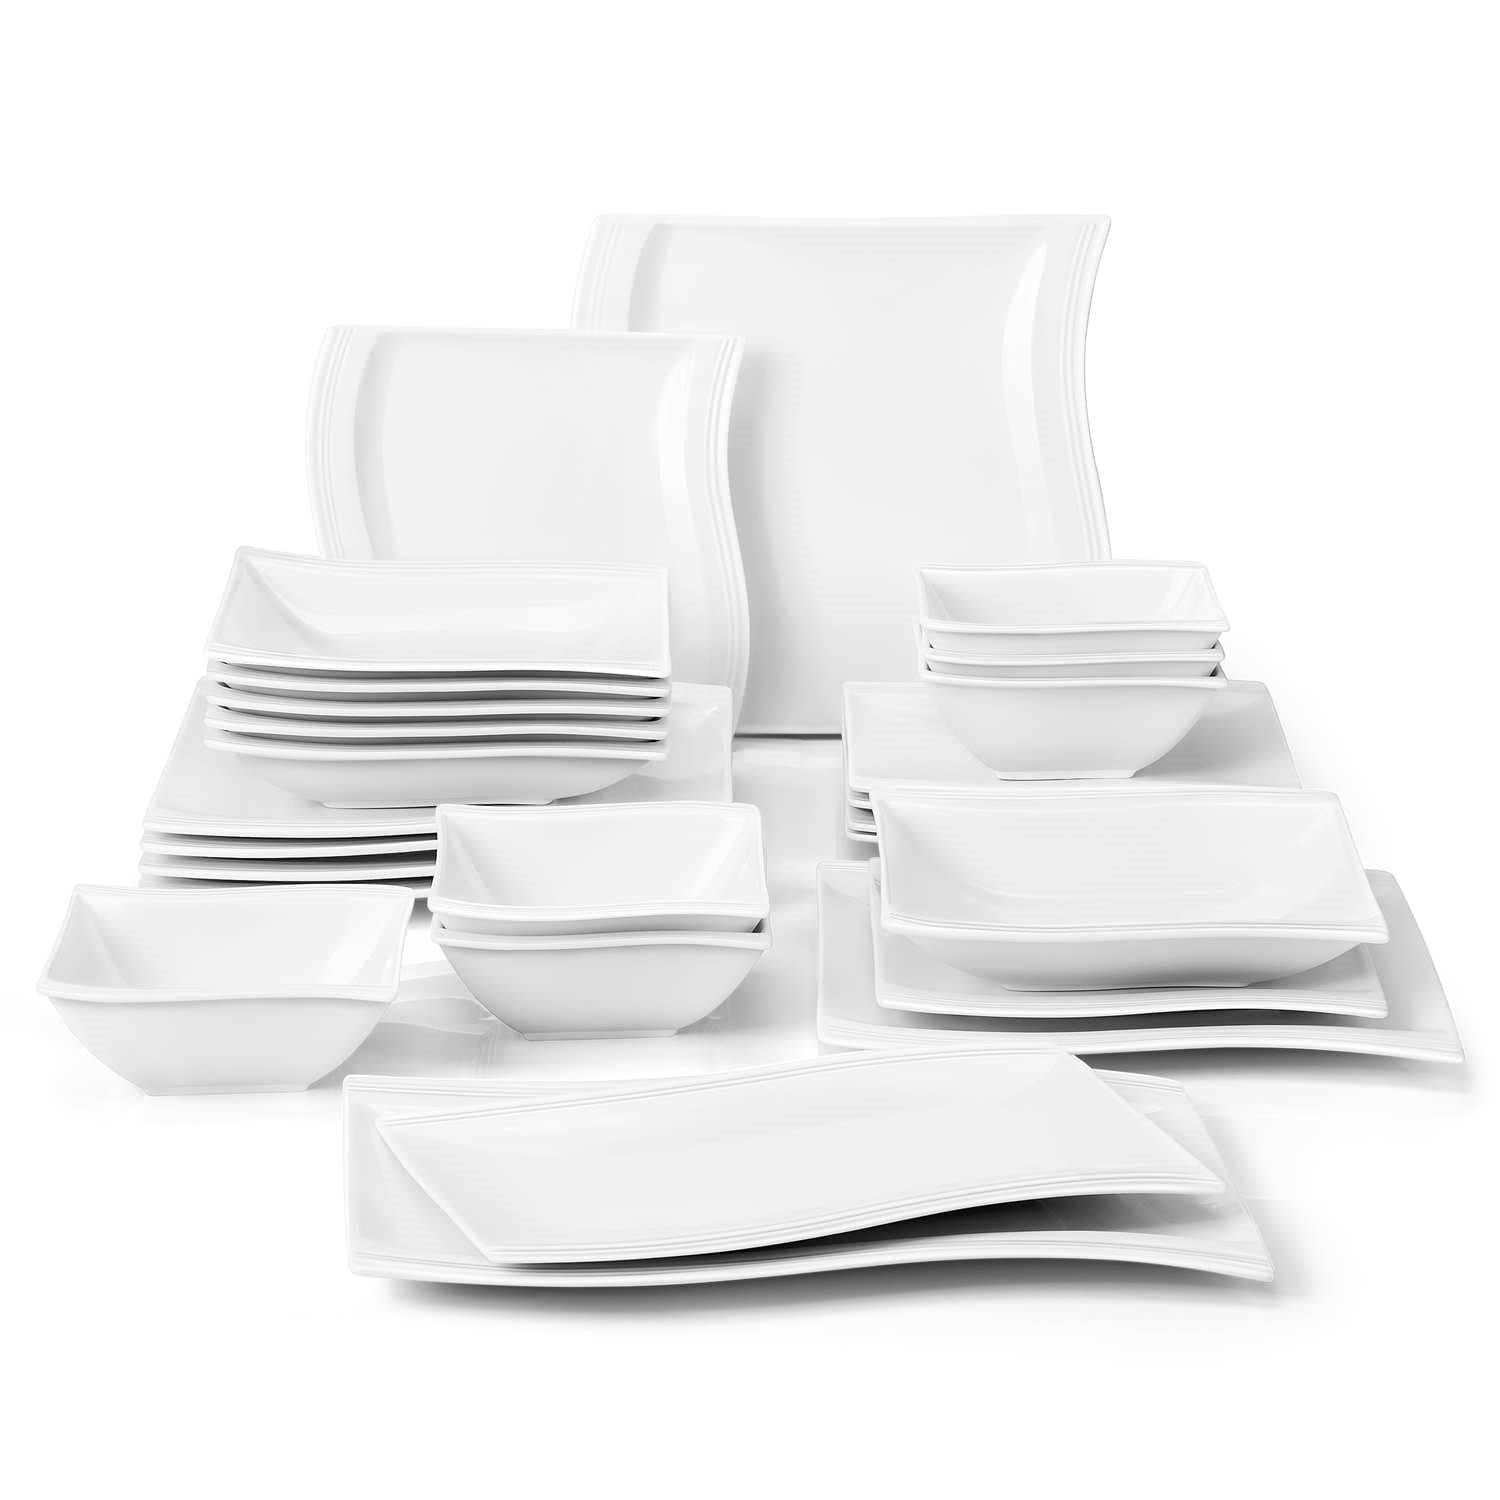 MALACASA, Series ELISA, 48-Piece Porcelain Dinnerware Set, White Dishes  With Black Line, Service for 12 